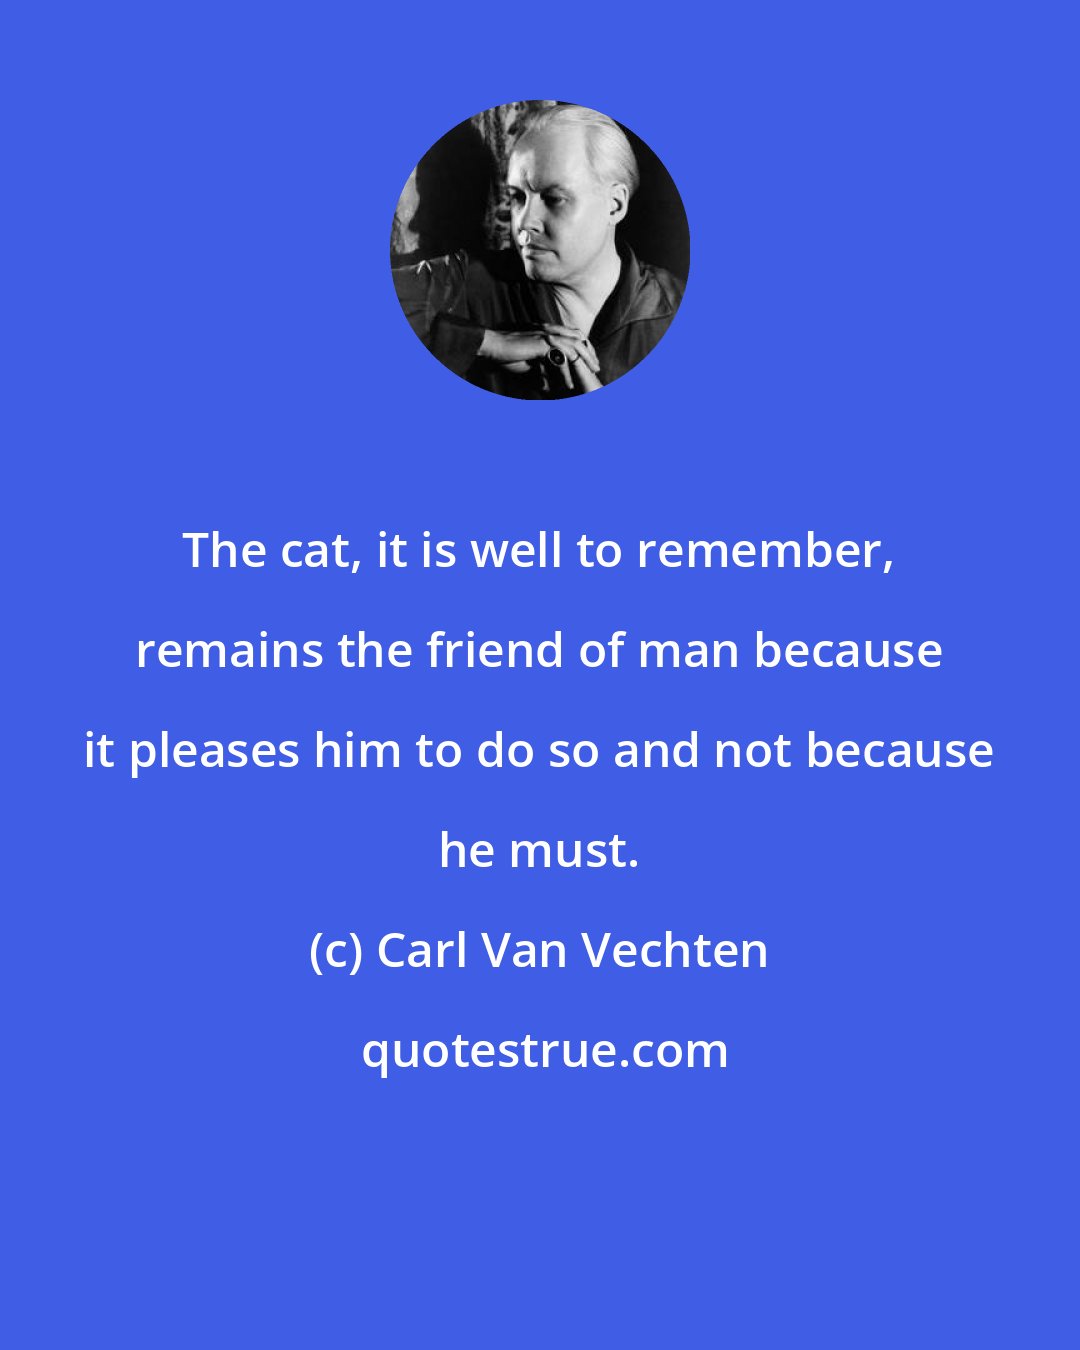 Carl Van Vechten: The cat, it is well to remember, remains the friend of man because it pleases him to do so and not because he must.